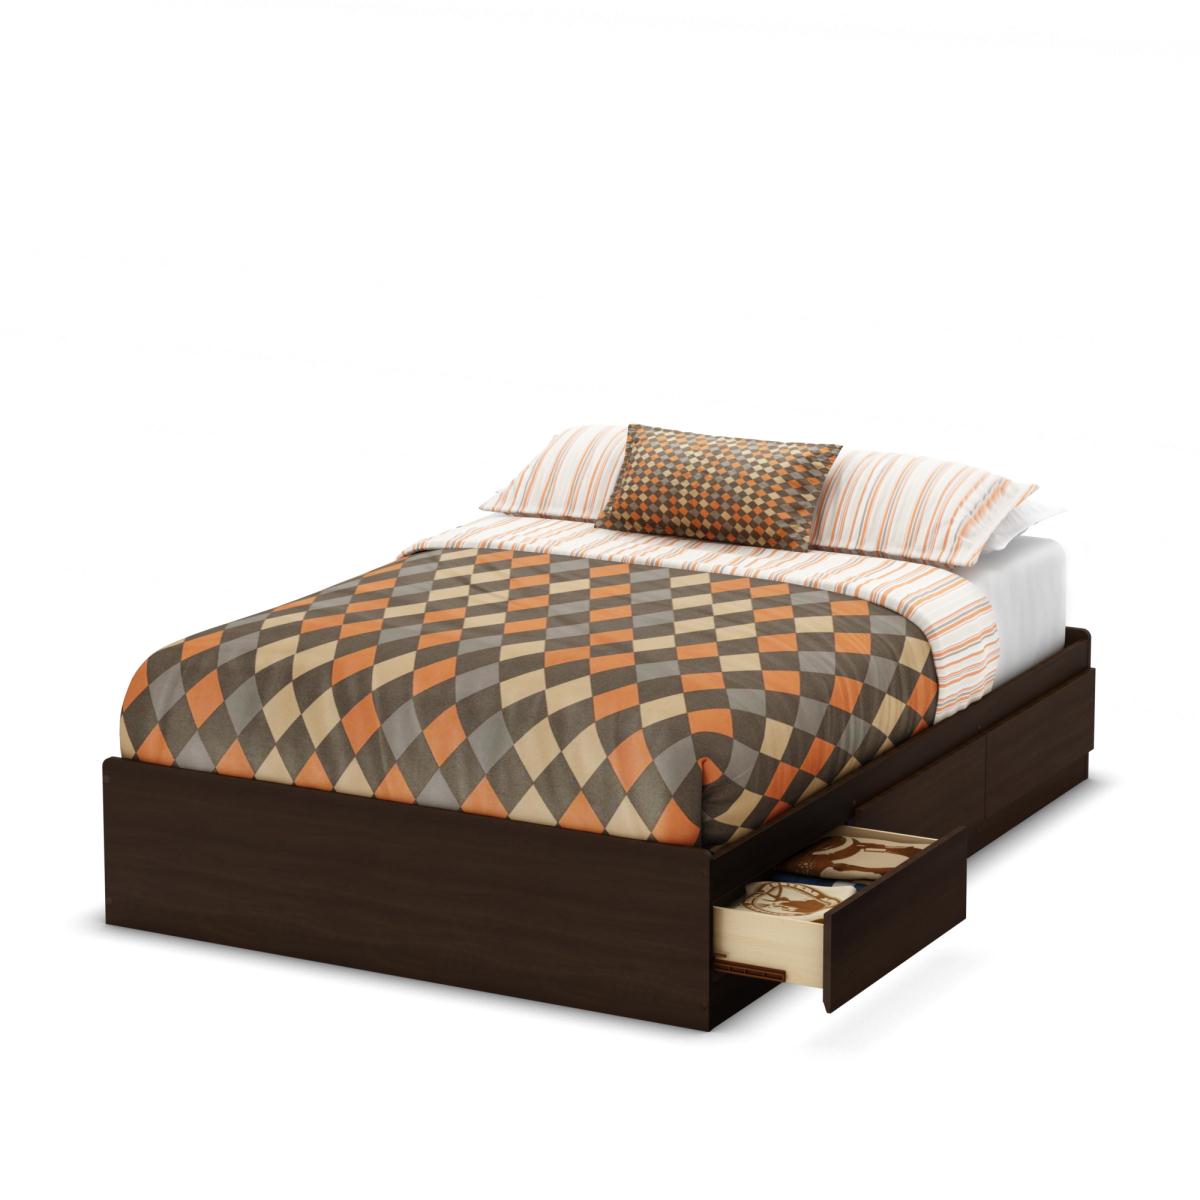 South Shore Clever Room Full Mates Bed - Mocha